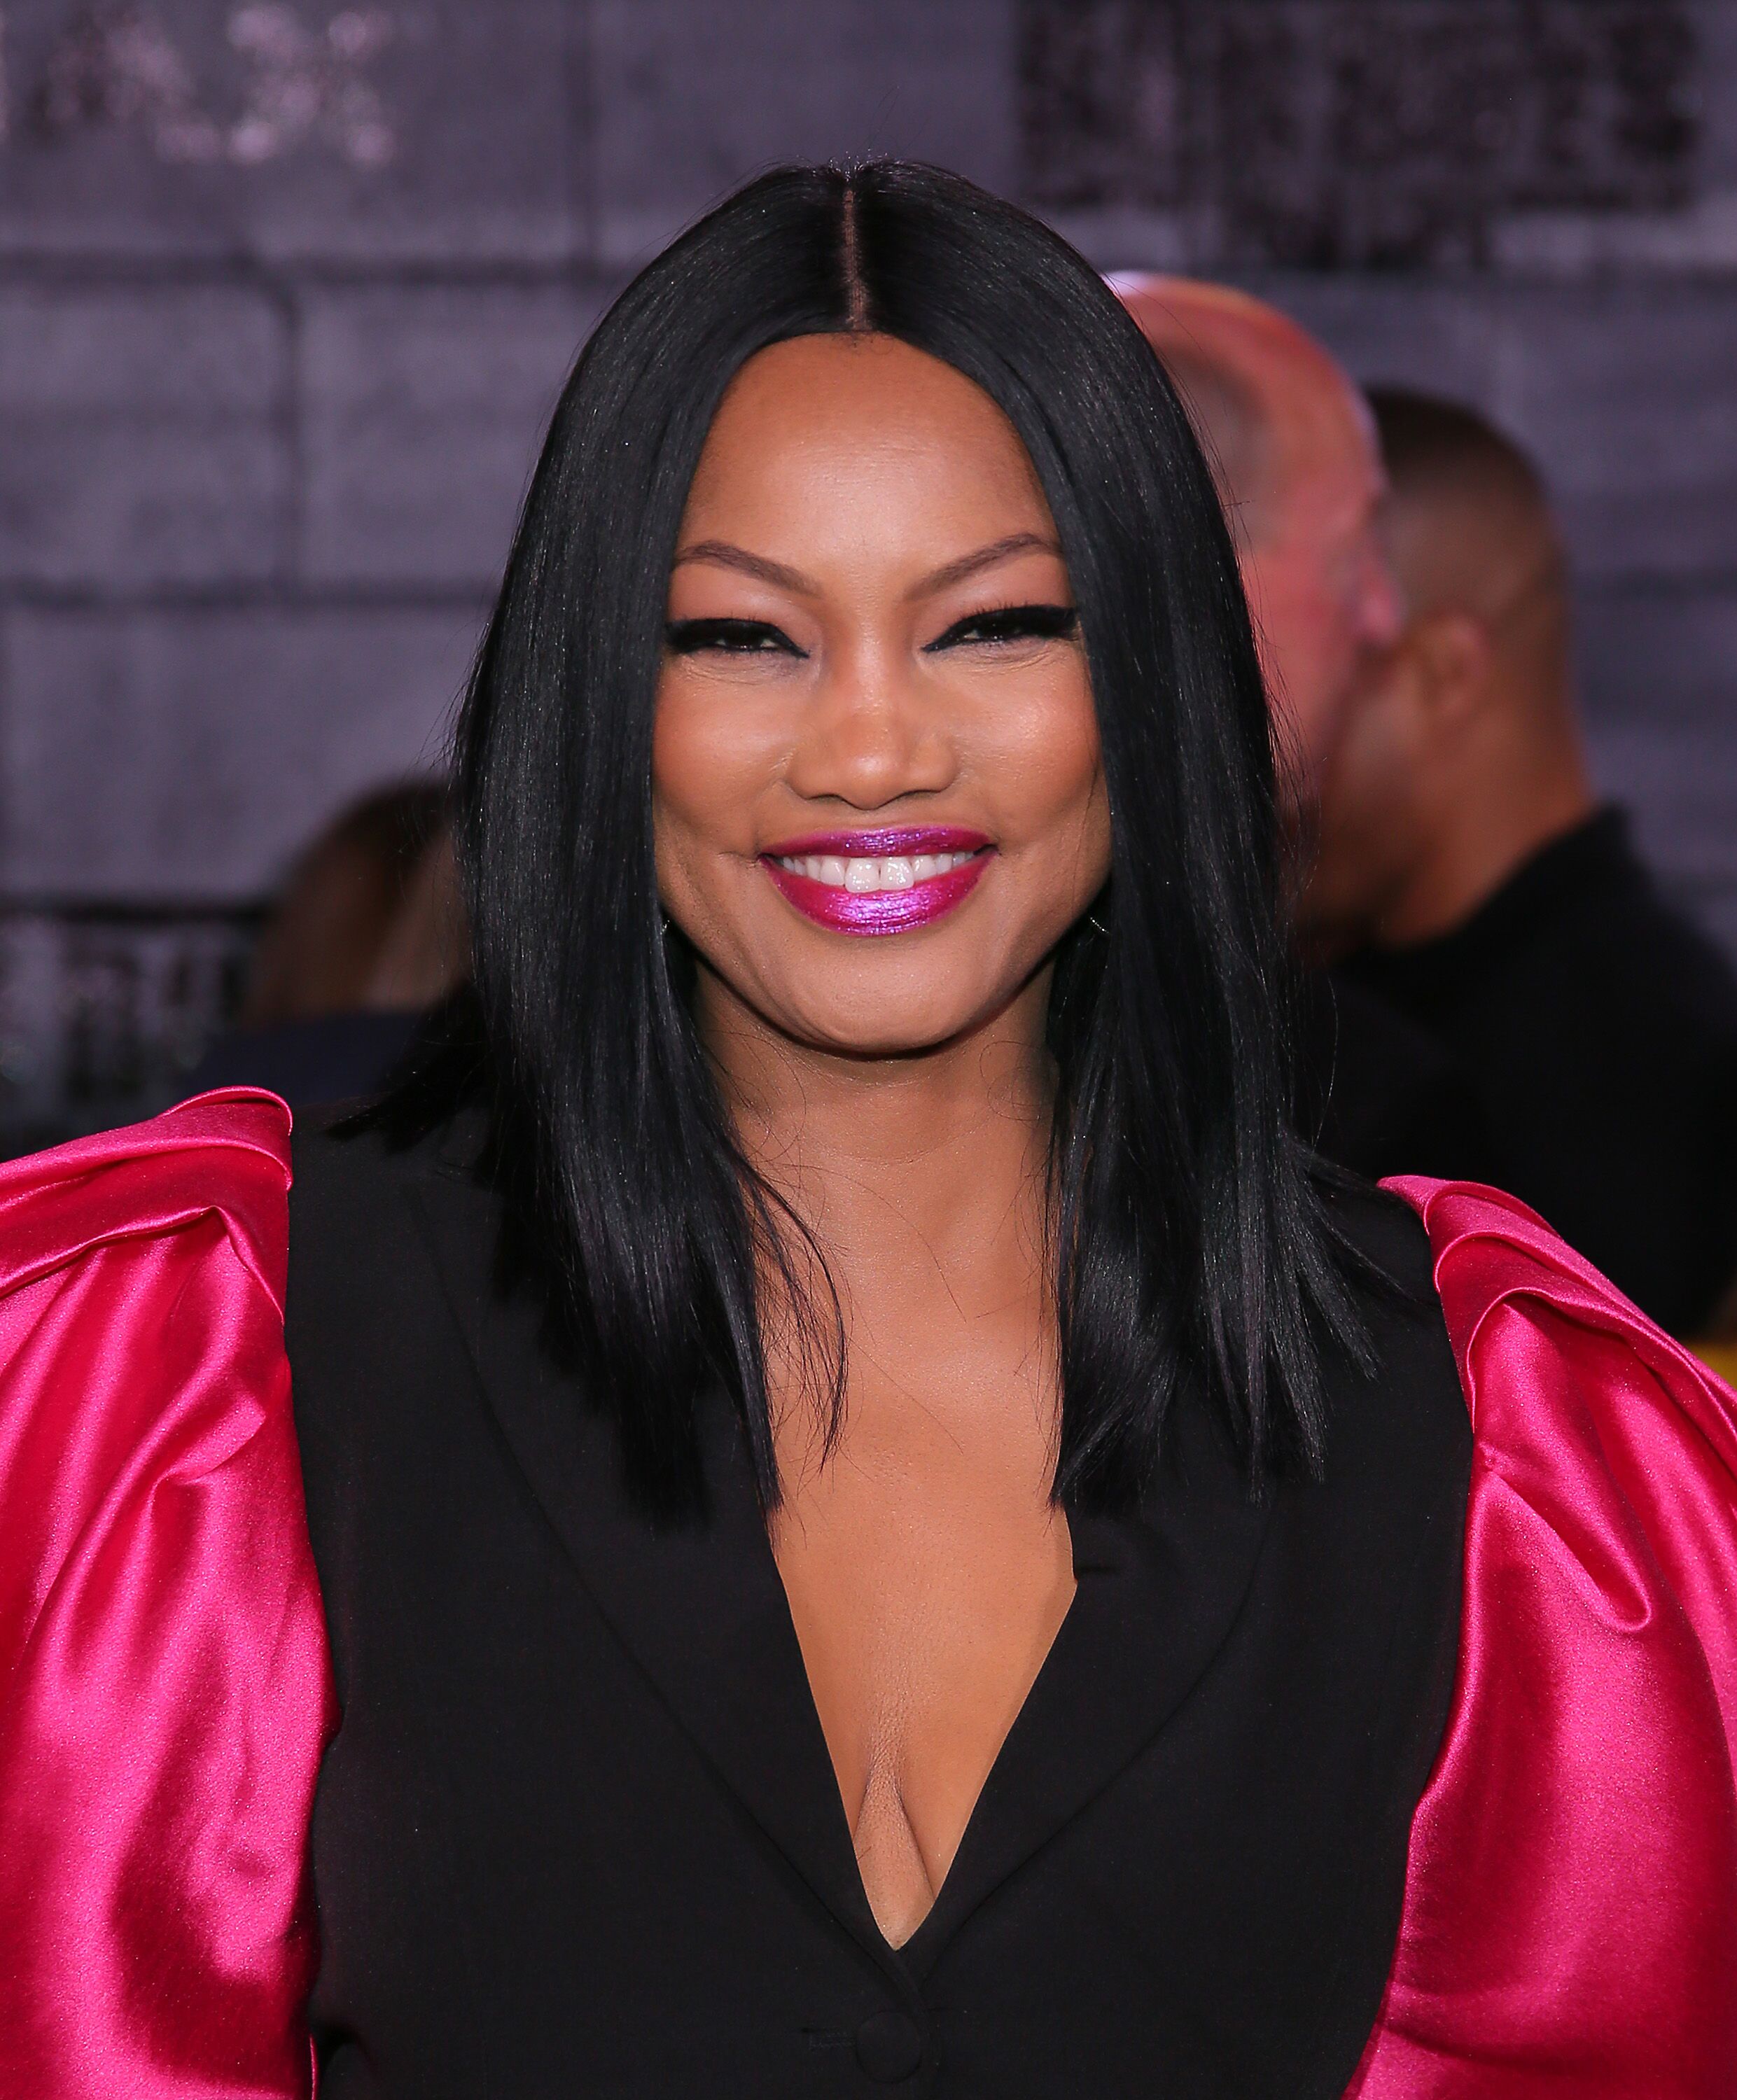 Garcelle Beauvais attends the World Premiere of "Bad Boys for Life" at TCL Chinese Theatre on January 14, 2020. | Photo: Getty Images